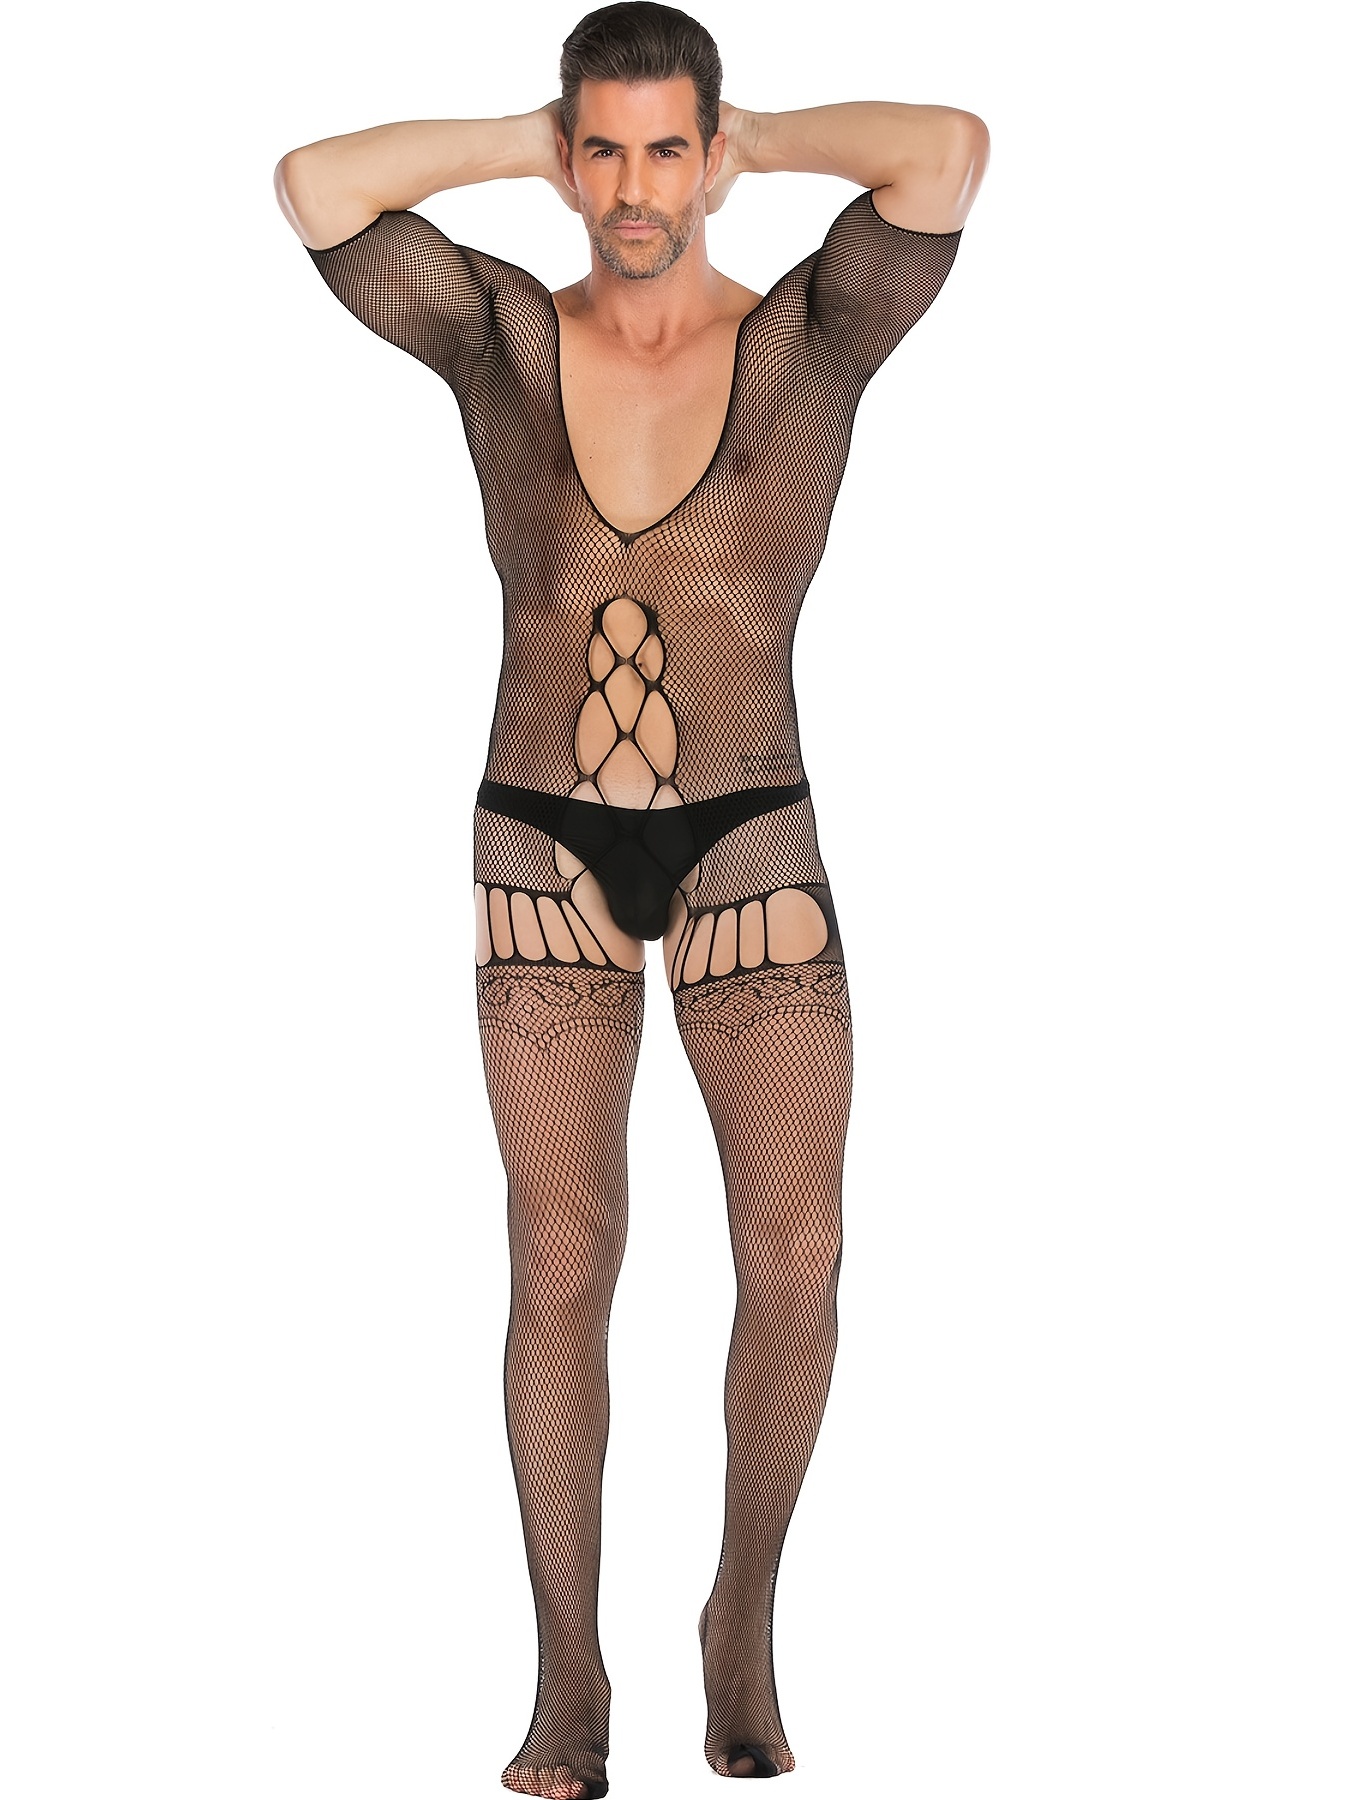 Men's Deep V-neck Crotchless Lingerie One Piece Bodysuit With Fishnet  Stockings, Briefs No Included, Today's Best Daily Deals